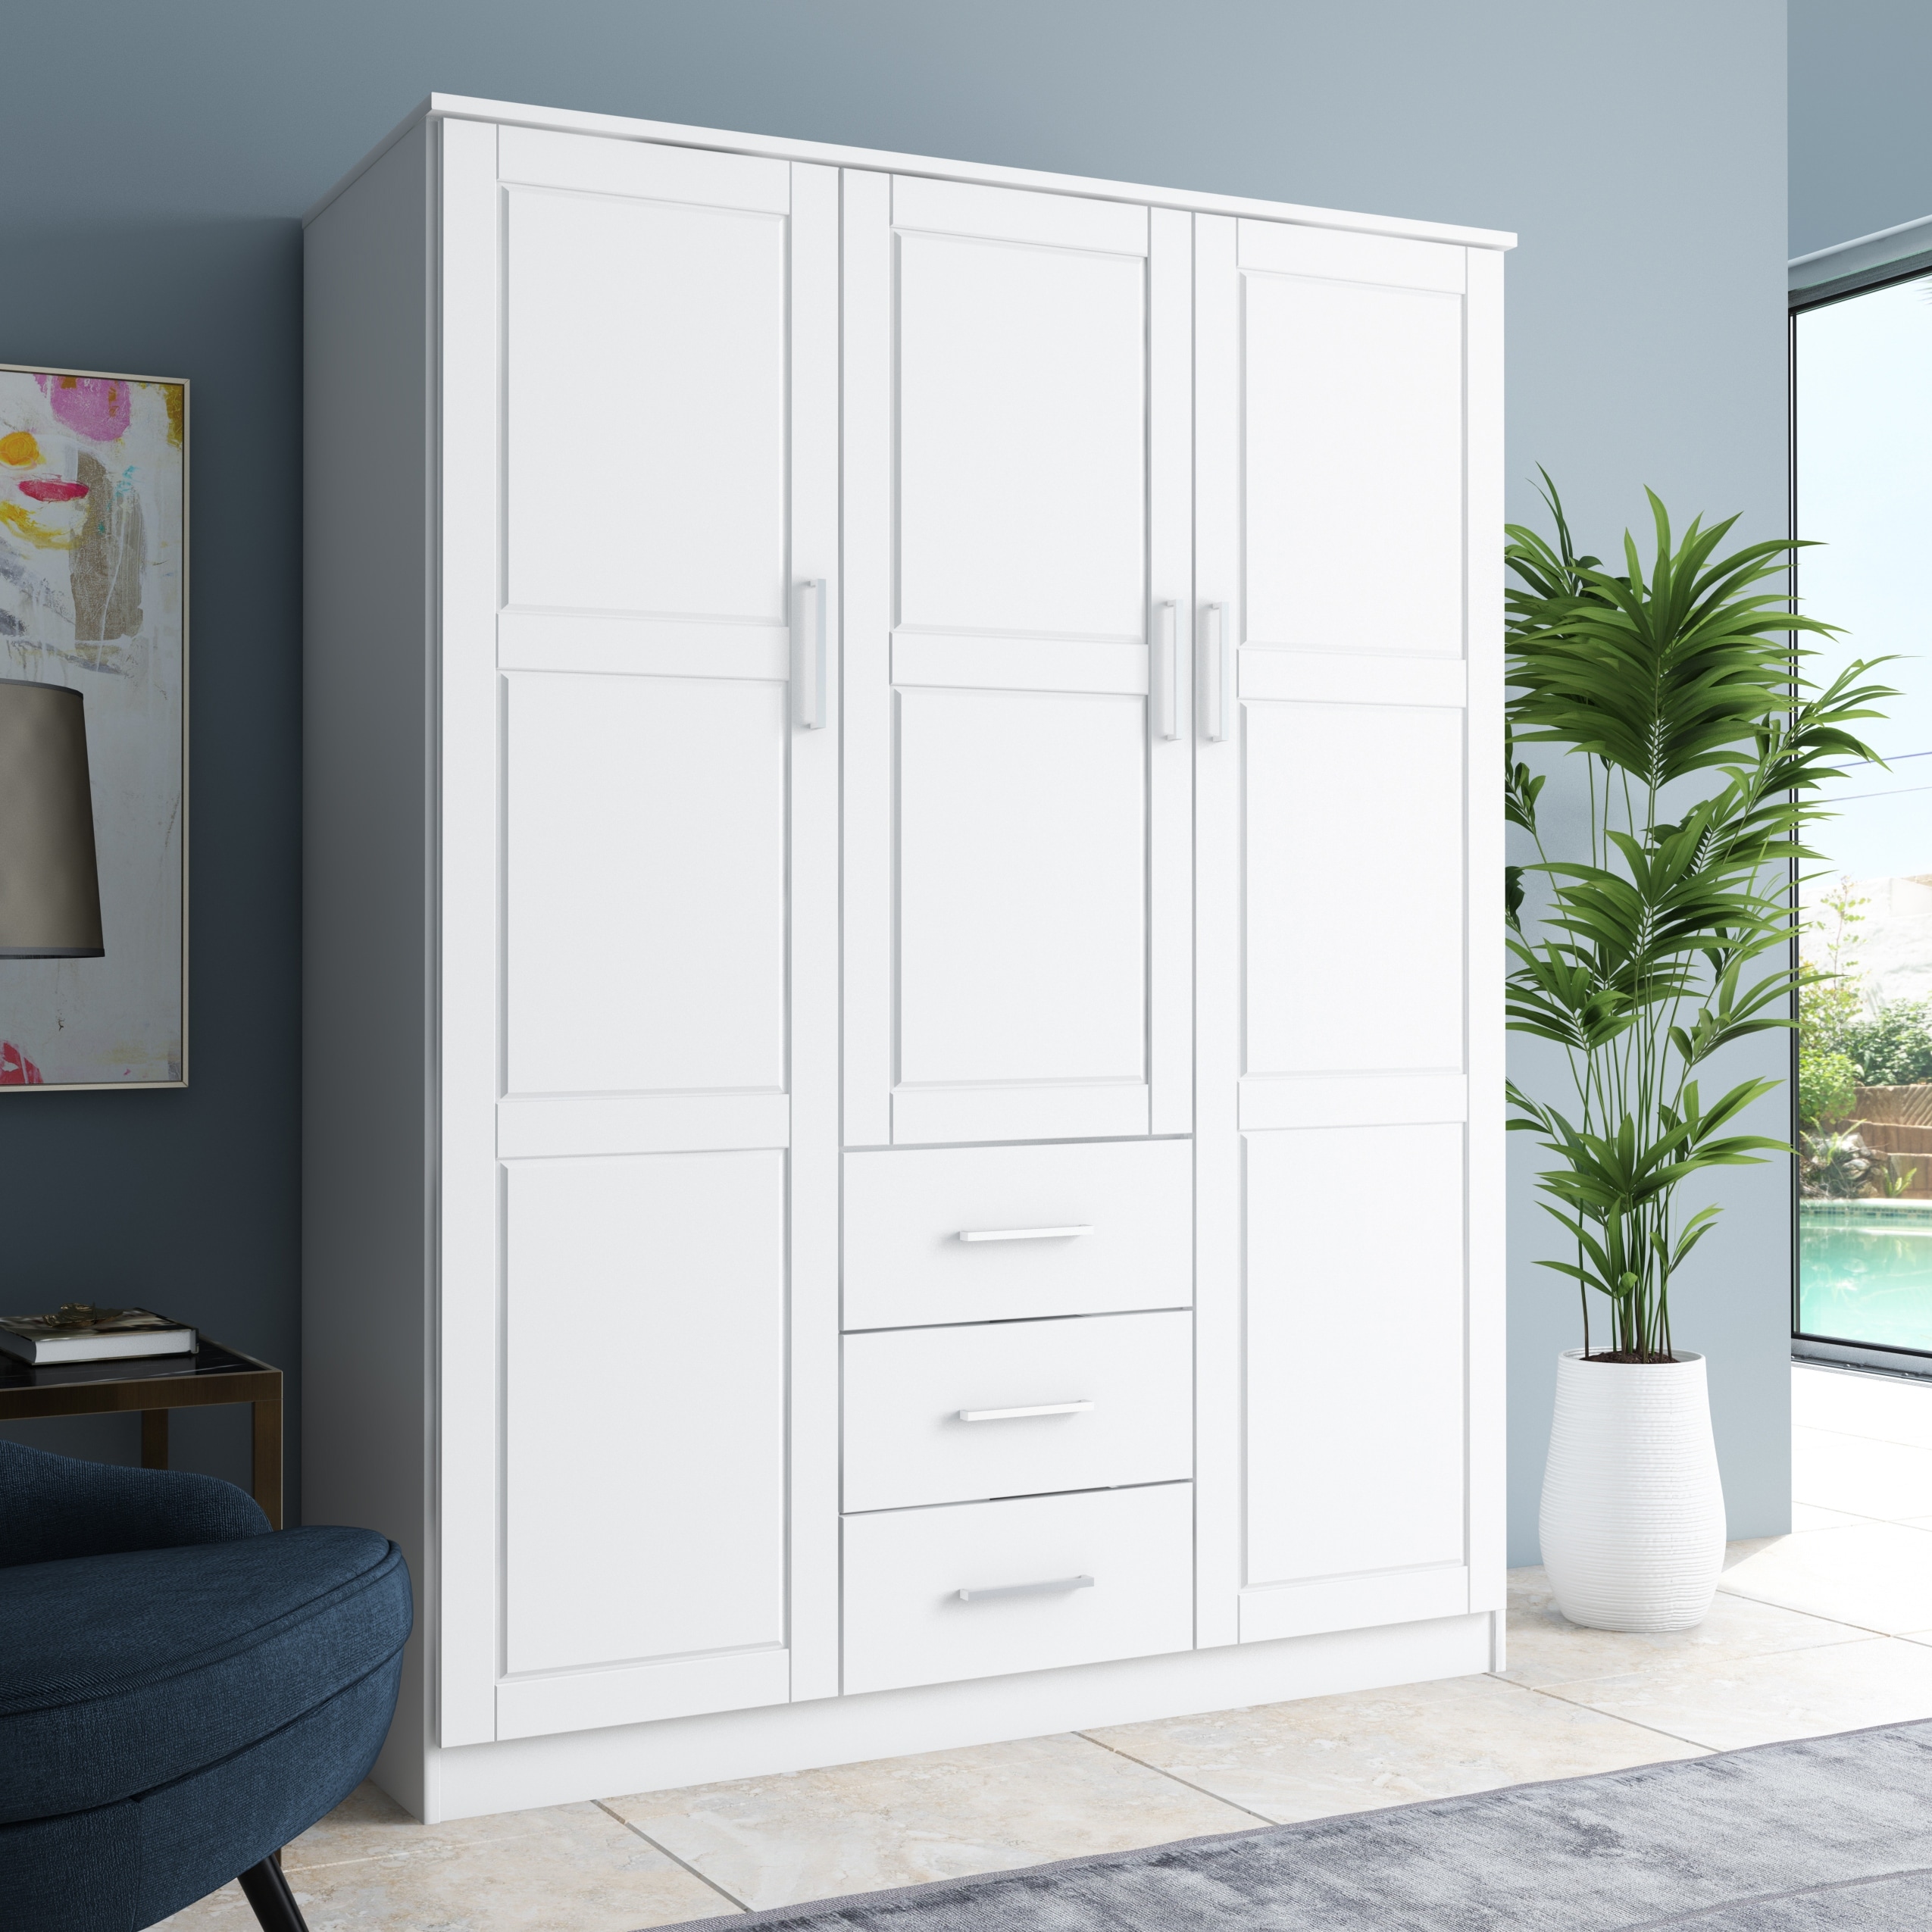 Palace Imports 100% Solid Wood Cosmo 3-Door Wardrobe Armoire with Solid  Wood or Mirrored Doors